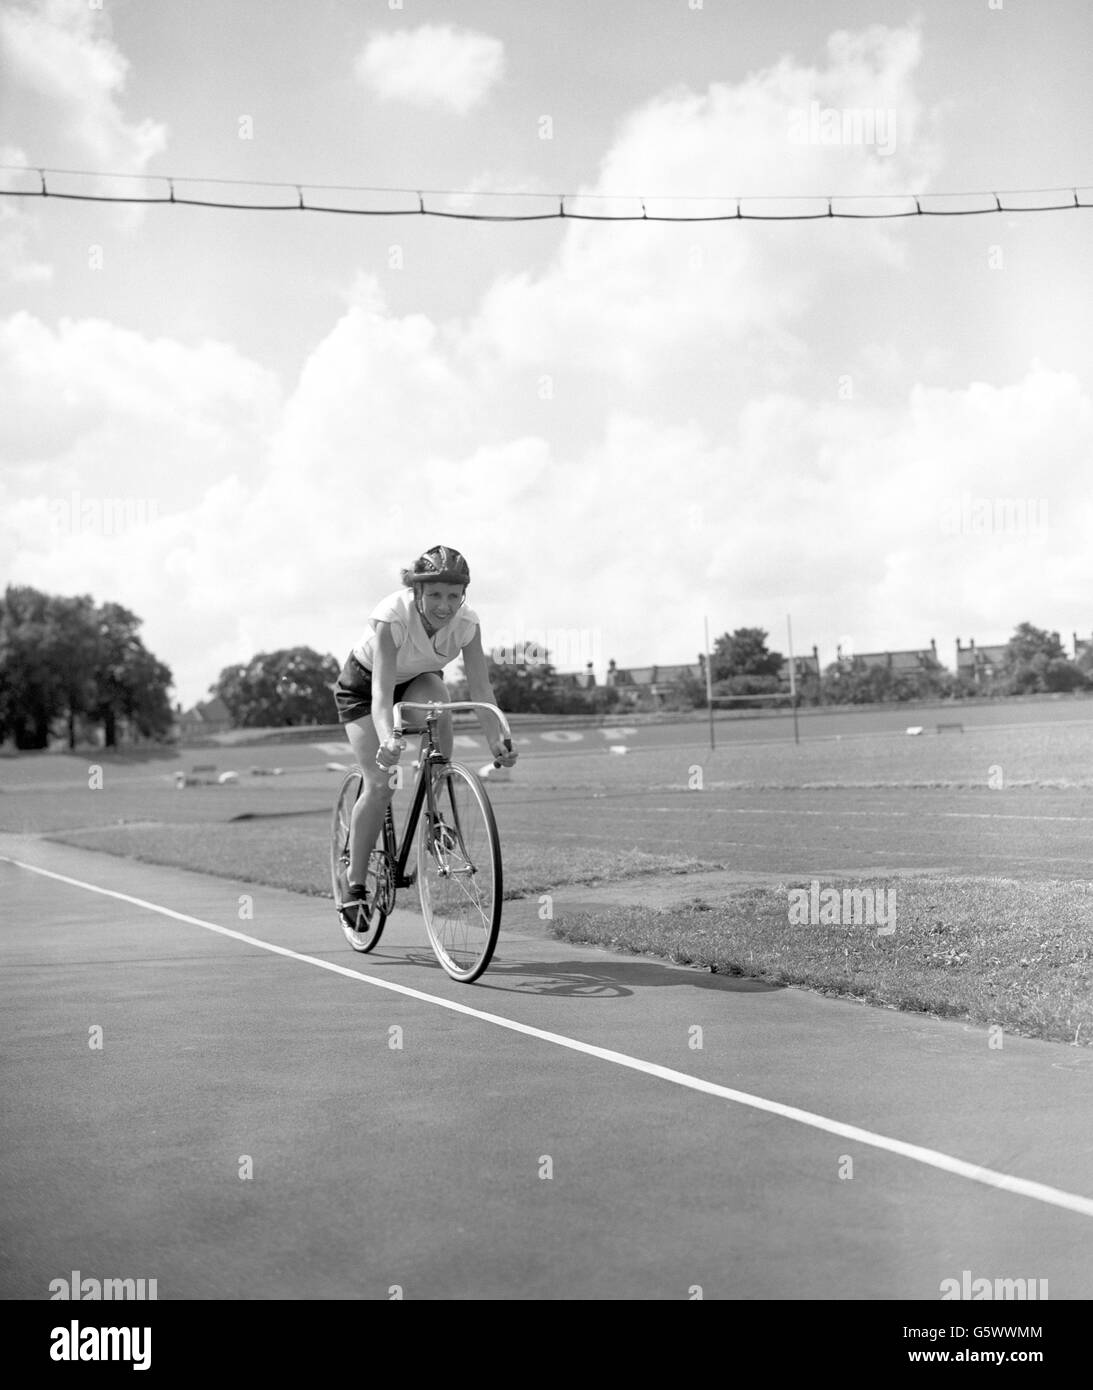 Training at Herne Hill cycle track in London is Eileen Sheridan, of Coventry, who is to make an attempt on the existing one-hour track record on Wednesday. She is considered one of the world's greatest all-round female cyclists and is holder of many records. Stock Photo